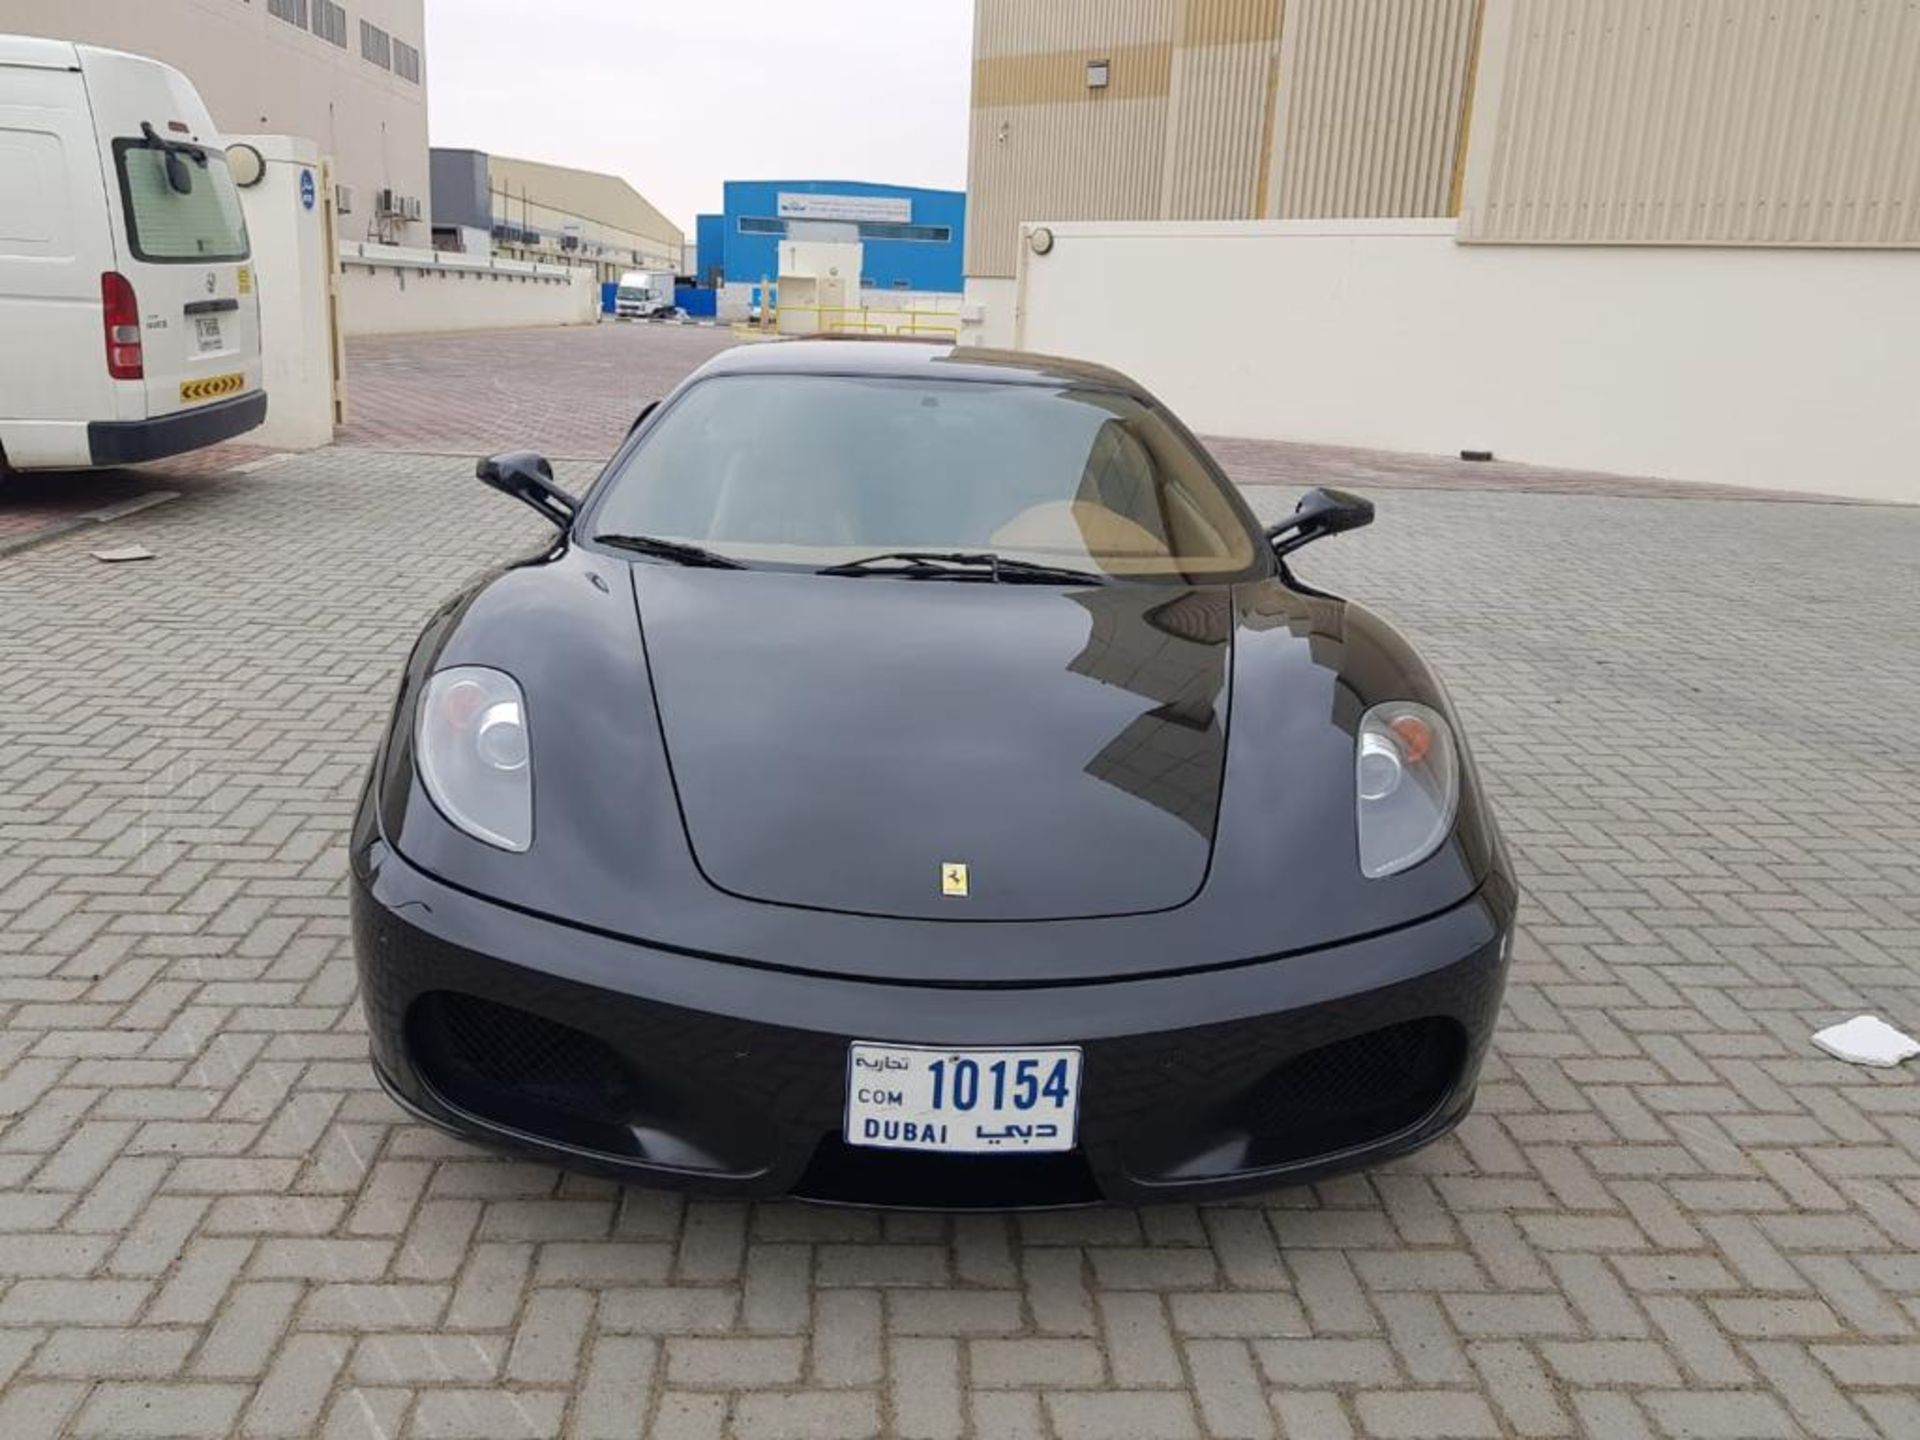 2007 FERRARI F430 BLACK 2 DOOR COUPE 4.3L AUTOMATIC LHD, PERFECT CONDITION INSIDE AND OUT - Image 2 of 13